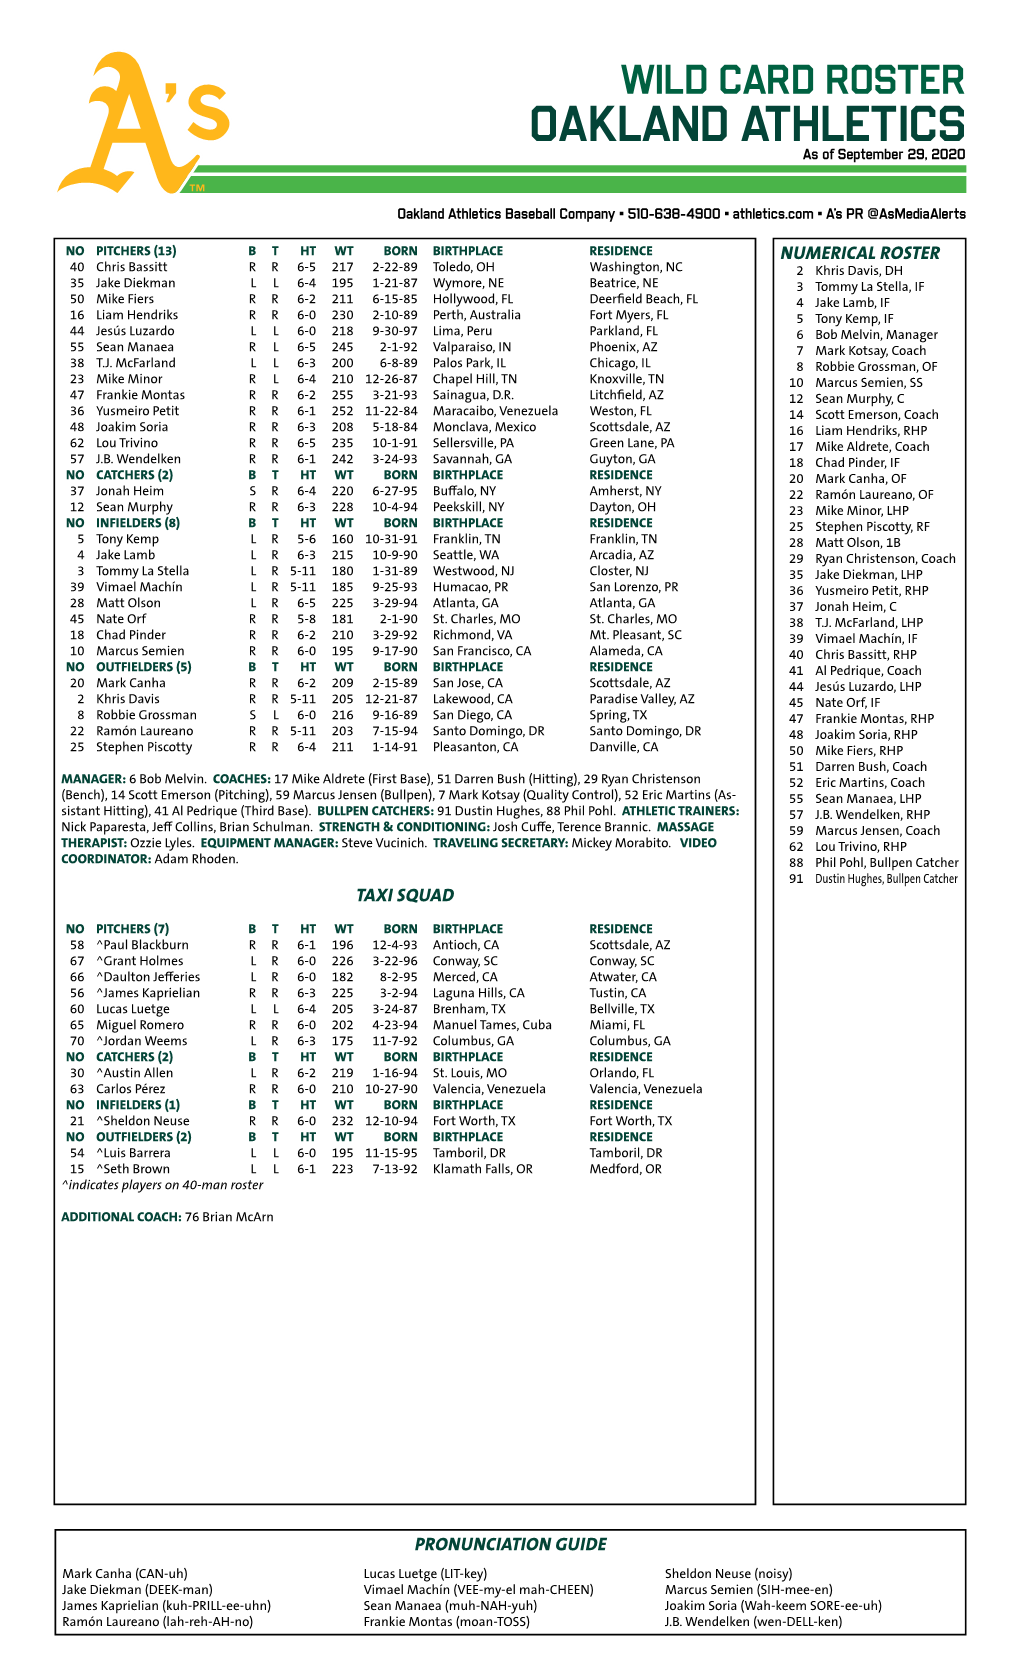 A's Wild Card Roster 2020